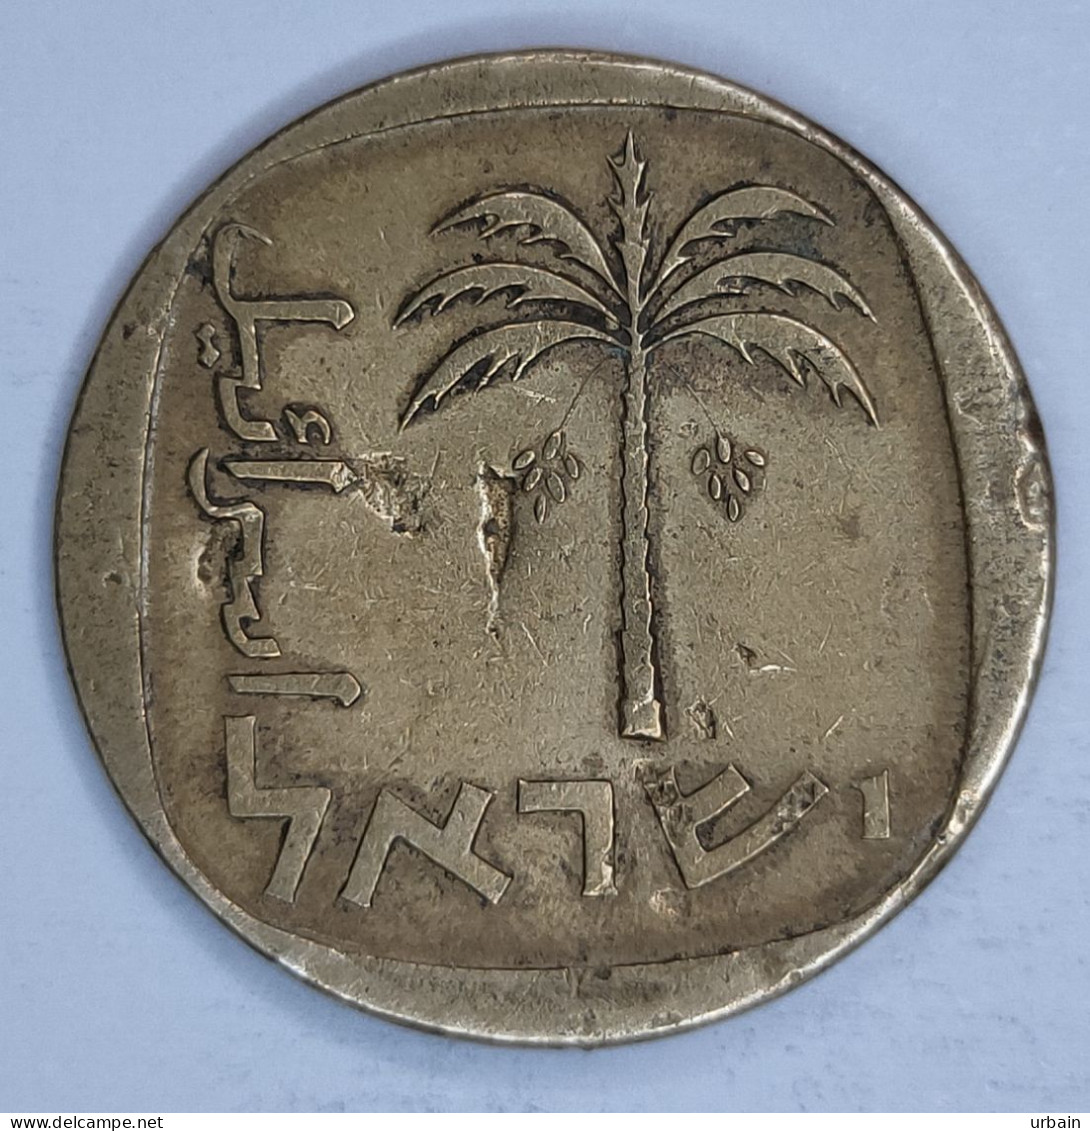 4x coins - ISREAL - from 1963 to 1977 - State of Israel (1960 – 1980)